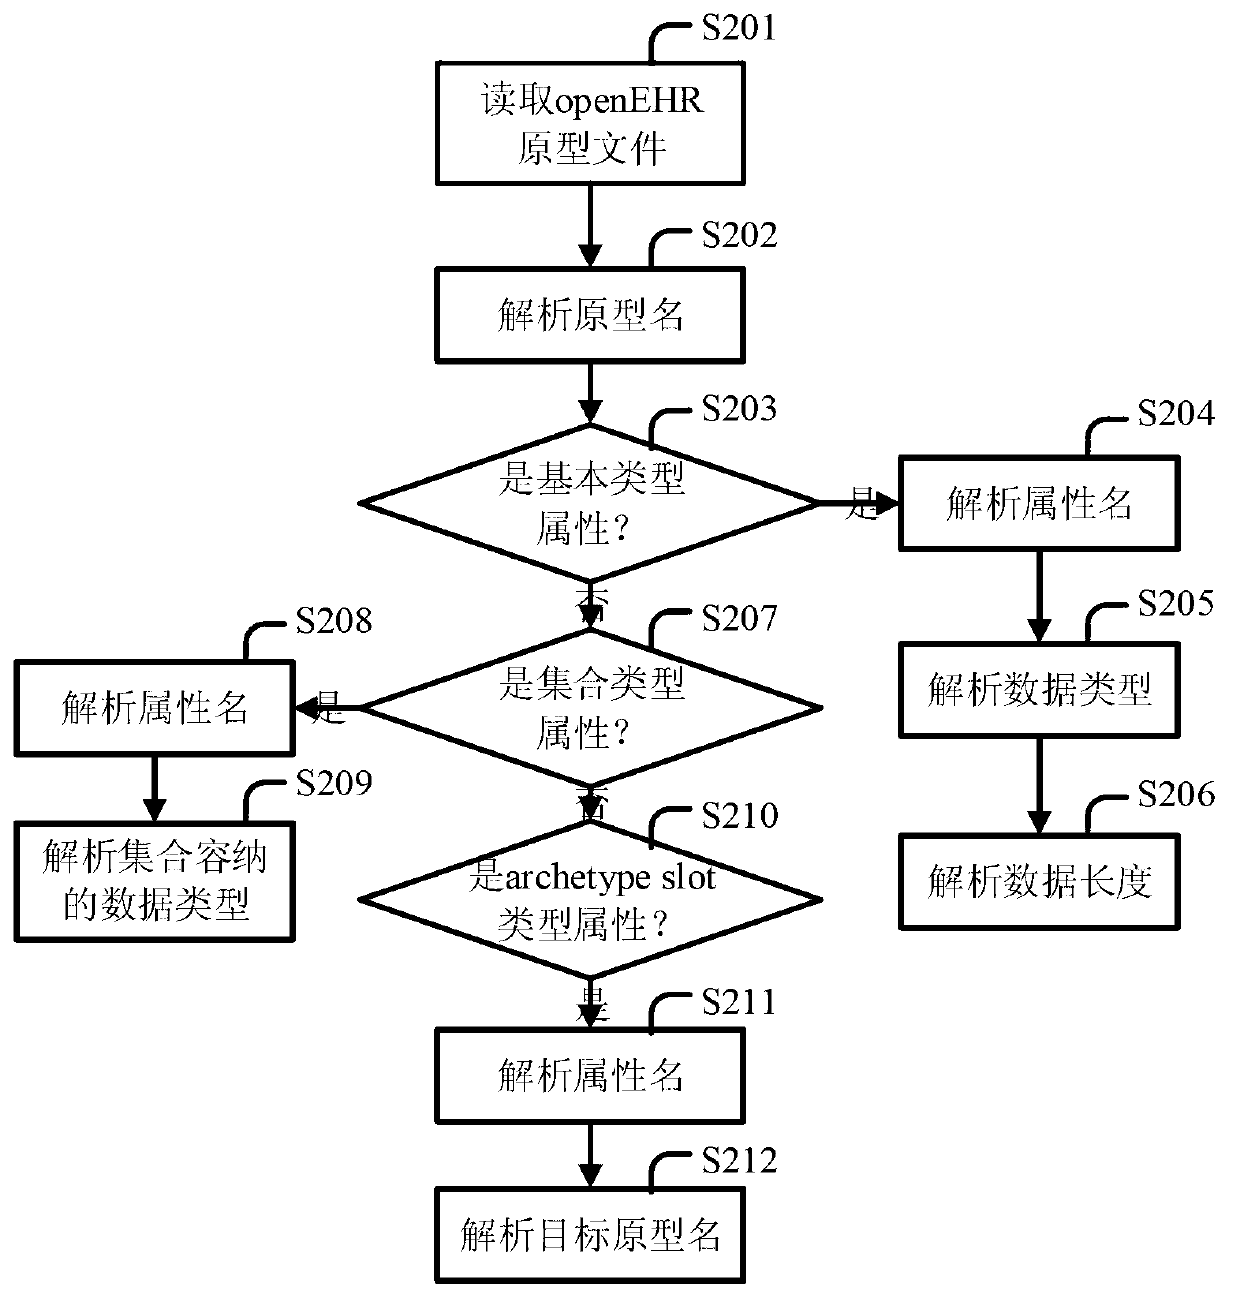 Method for converting openEHR information into relational database